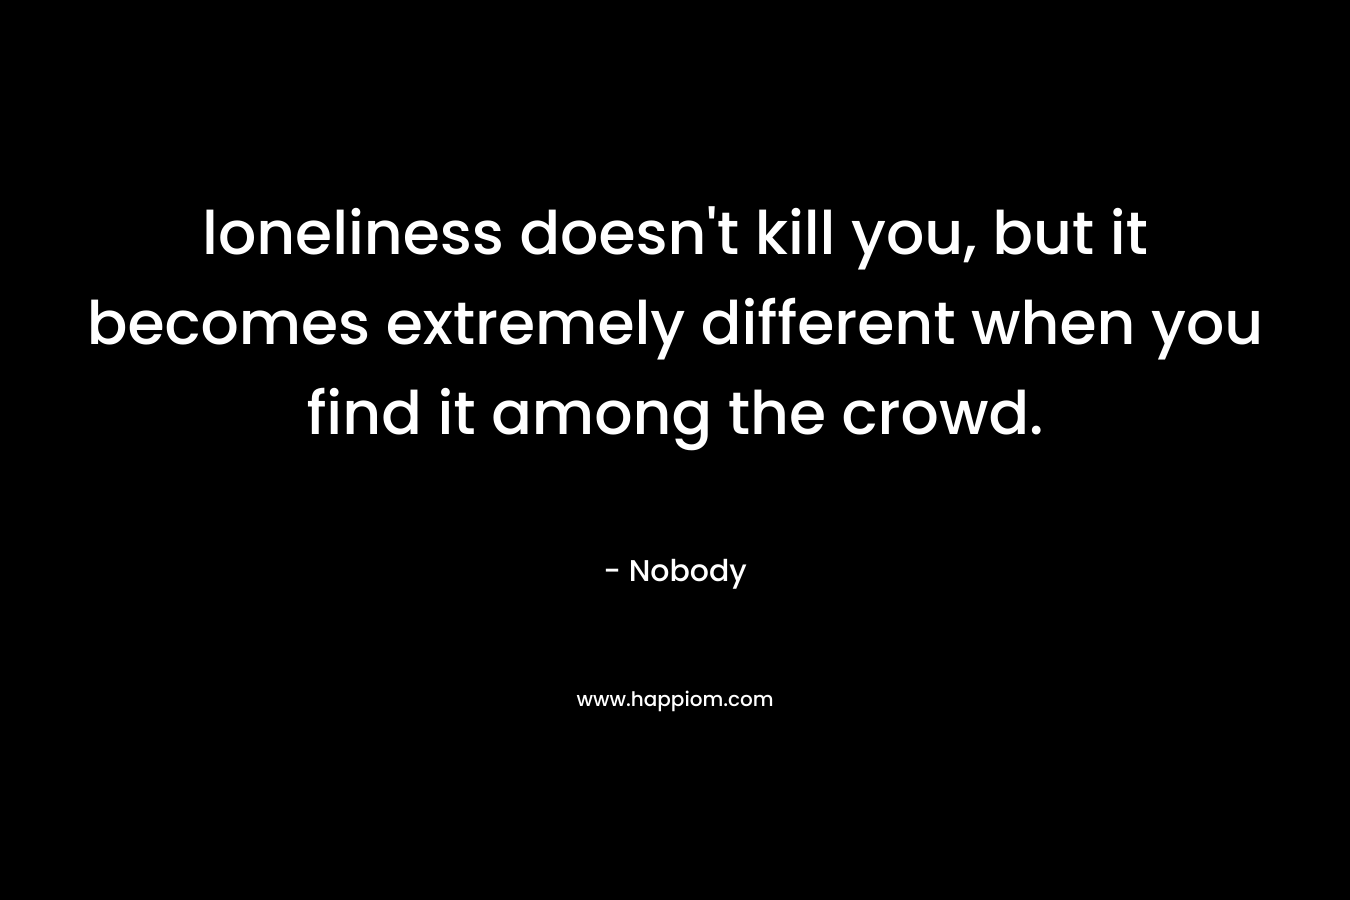 loneliness doesn’t kill you, but it becomes extremely different when you find it among the crowd. – Nobody